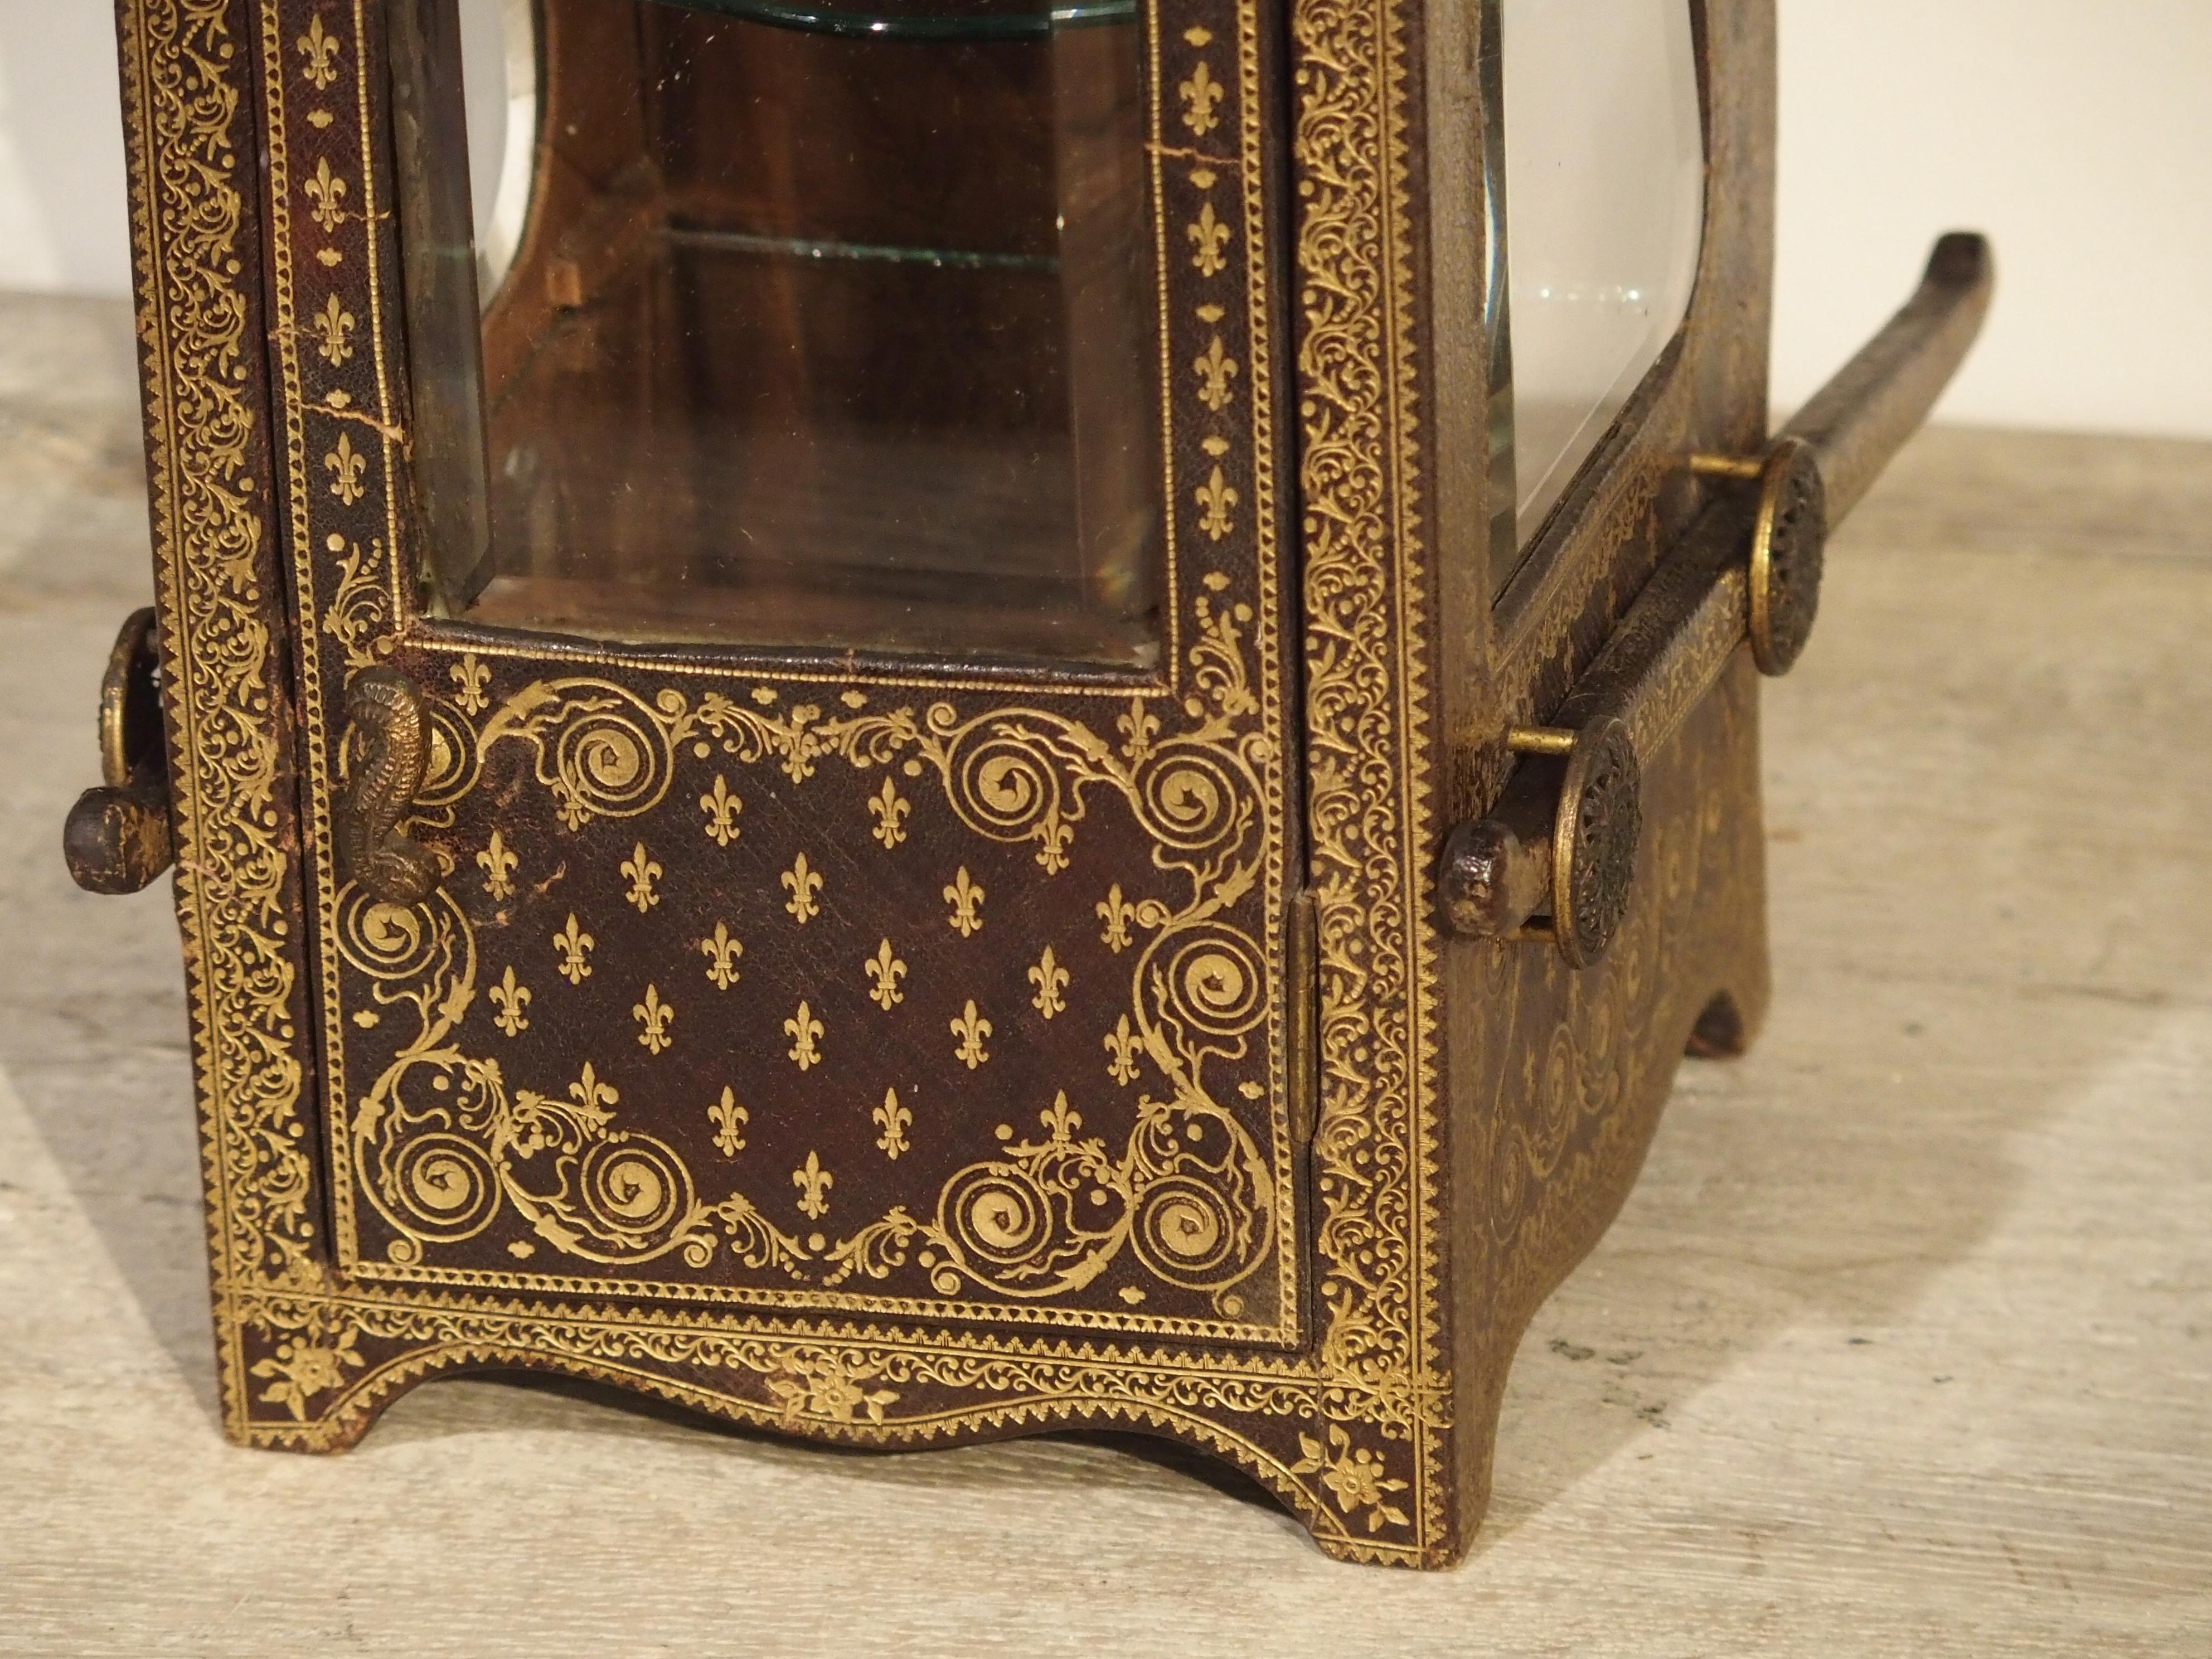 This Chaise a Porteur, or Sedan chair is a miniaturized version of full scale models typically used in the 16th-18th centuries. Urban homes and Chateaux of nobility often had these placed in entry halls of their beautiful homes. They were a way for